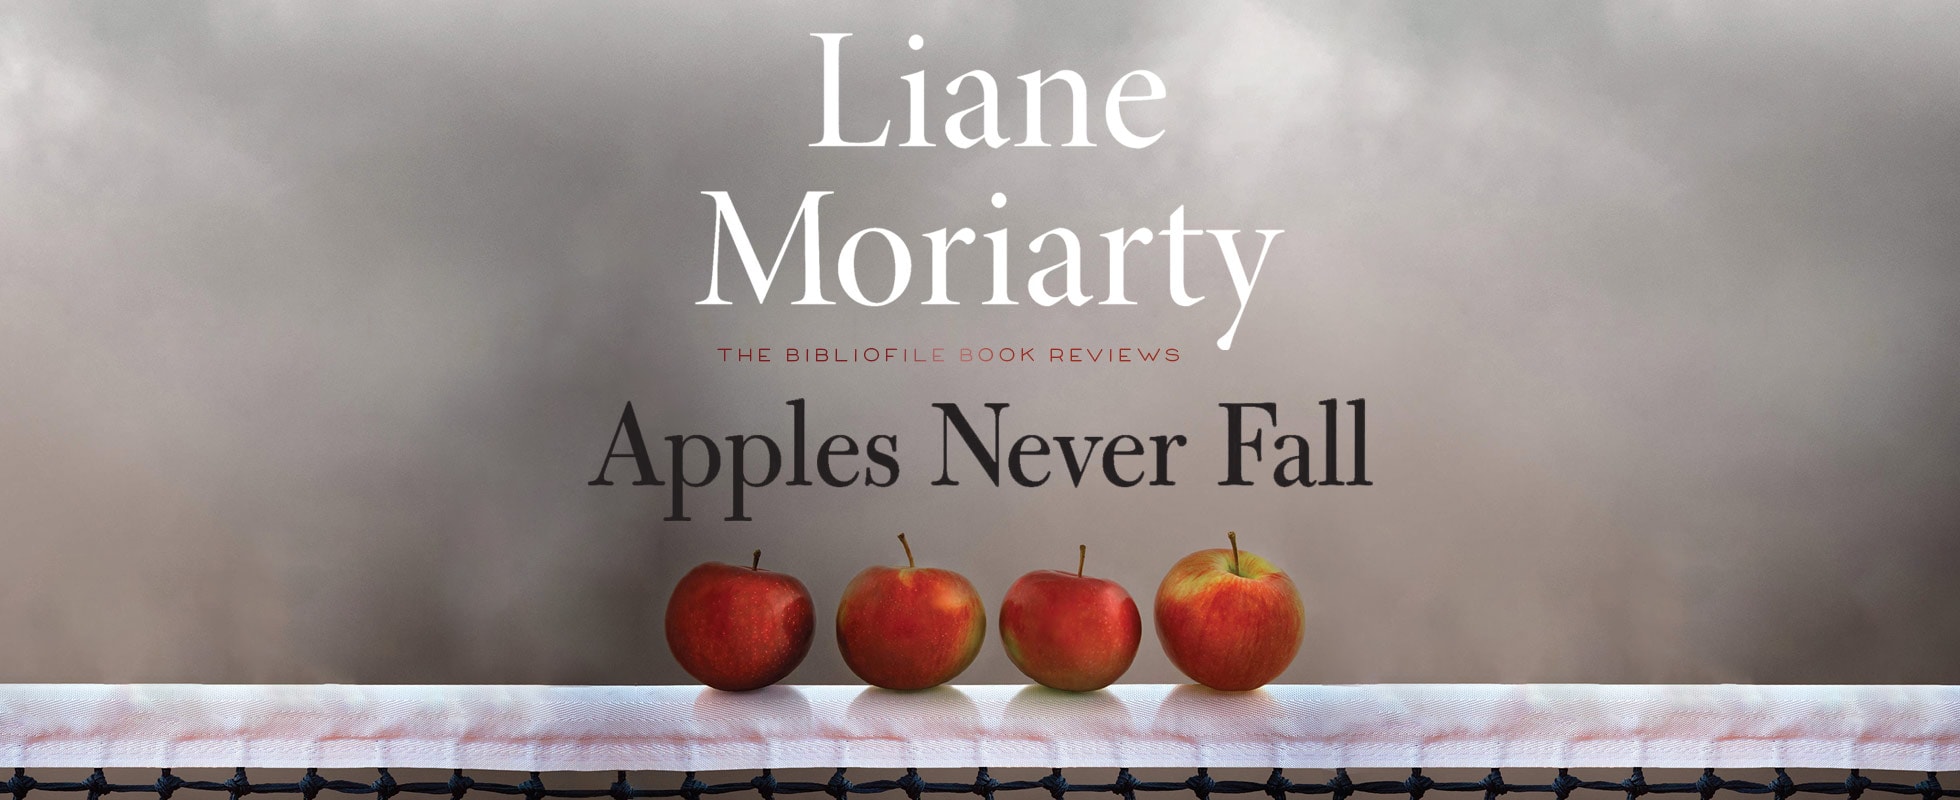 apples never fall by liane moriarty book review plot summary synopsis review ending discussion spoilers